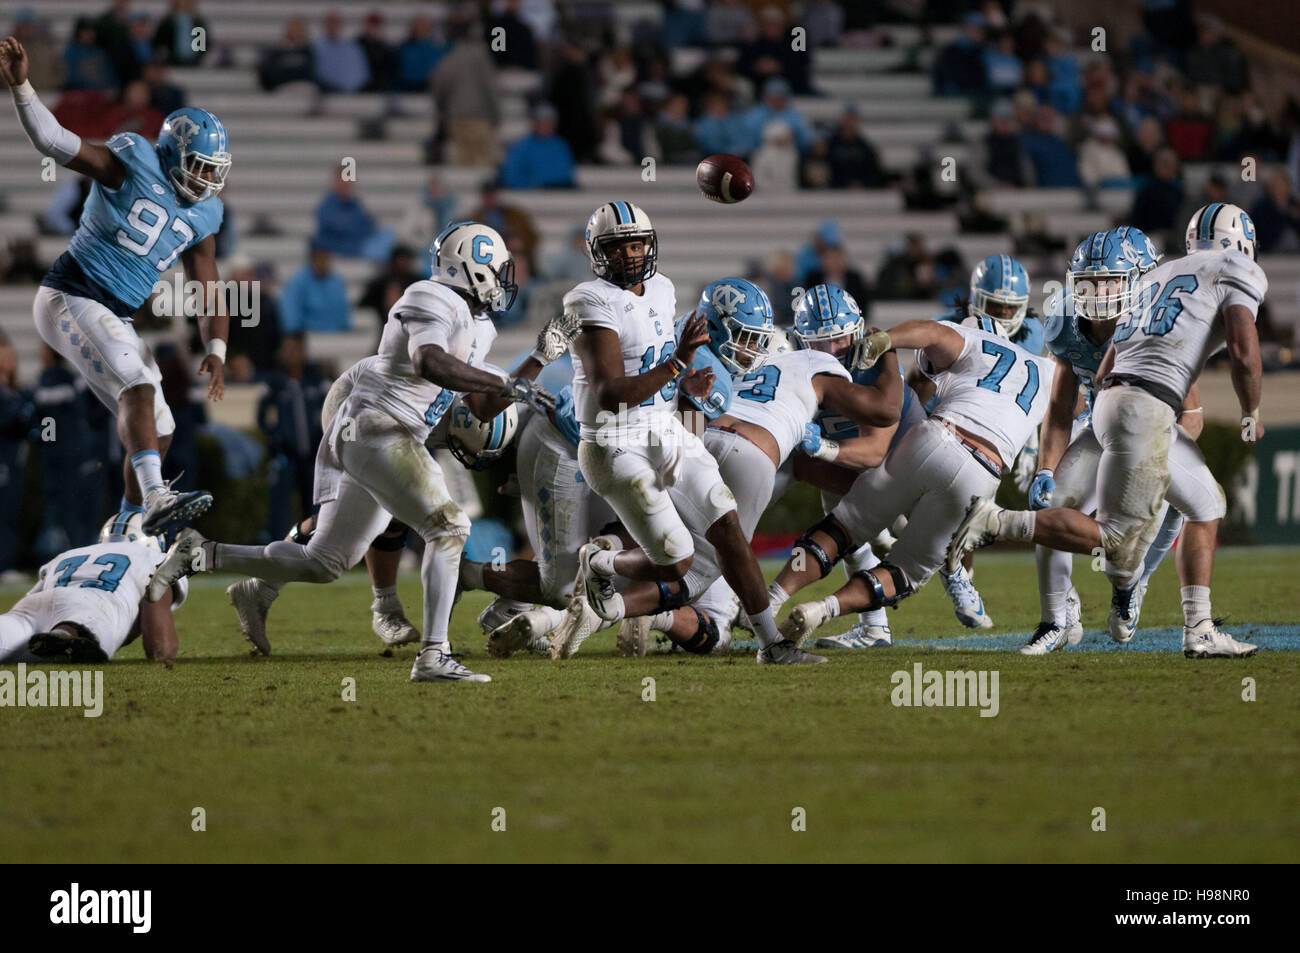 Chapel Hill, North Carolina, US. 19th Nov, 2016. Nov. 19, 2016 - Chapel Hill, N.C., USA - Citadel Bulldogs quarterback Dominique Allen (19) pitches the ball during the second half of an NCAA football game between the North Carolina Tar Heels and The Citadel Bulldogs at Kenan Memorial Stadium in Chapel Hill, N.C. North Carolina won the game, 41-7. © Timothy L. Hale/ZUMA Wire/Alamy Live News Stock Photo